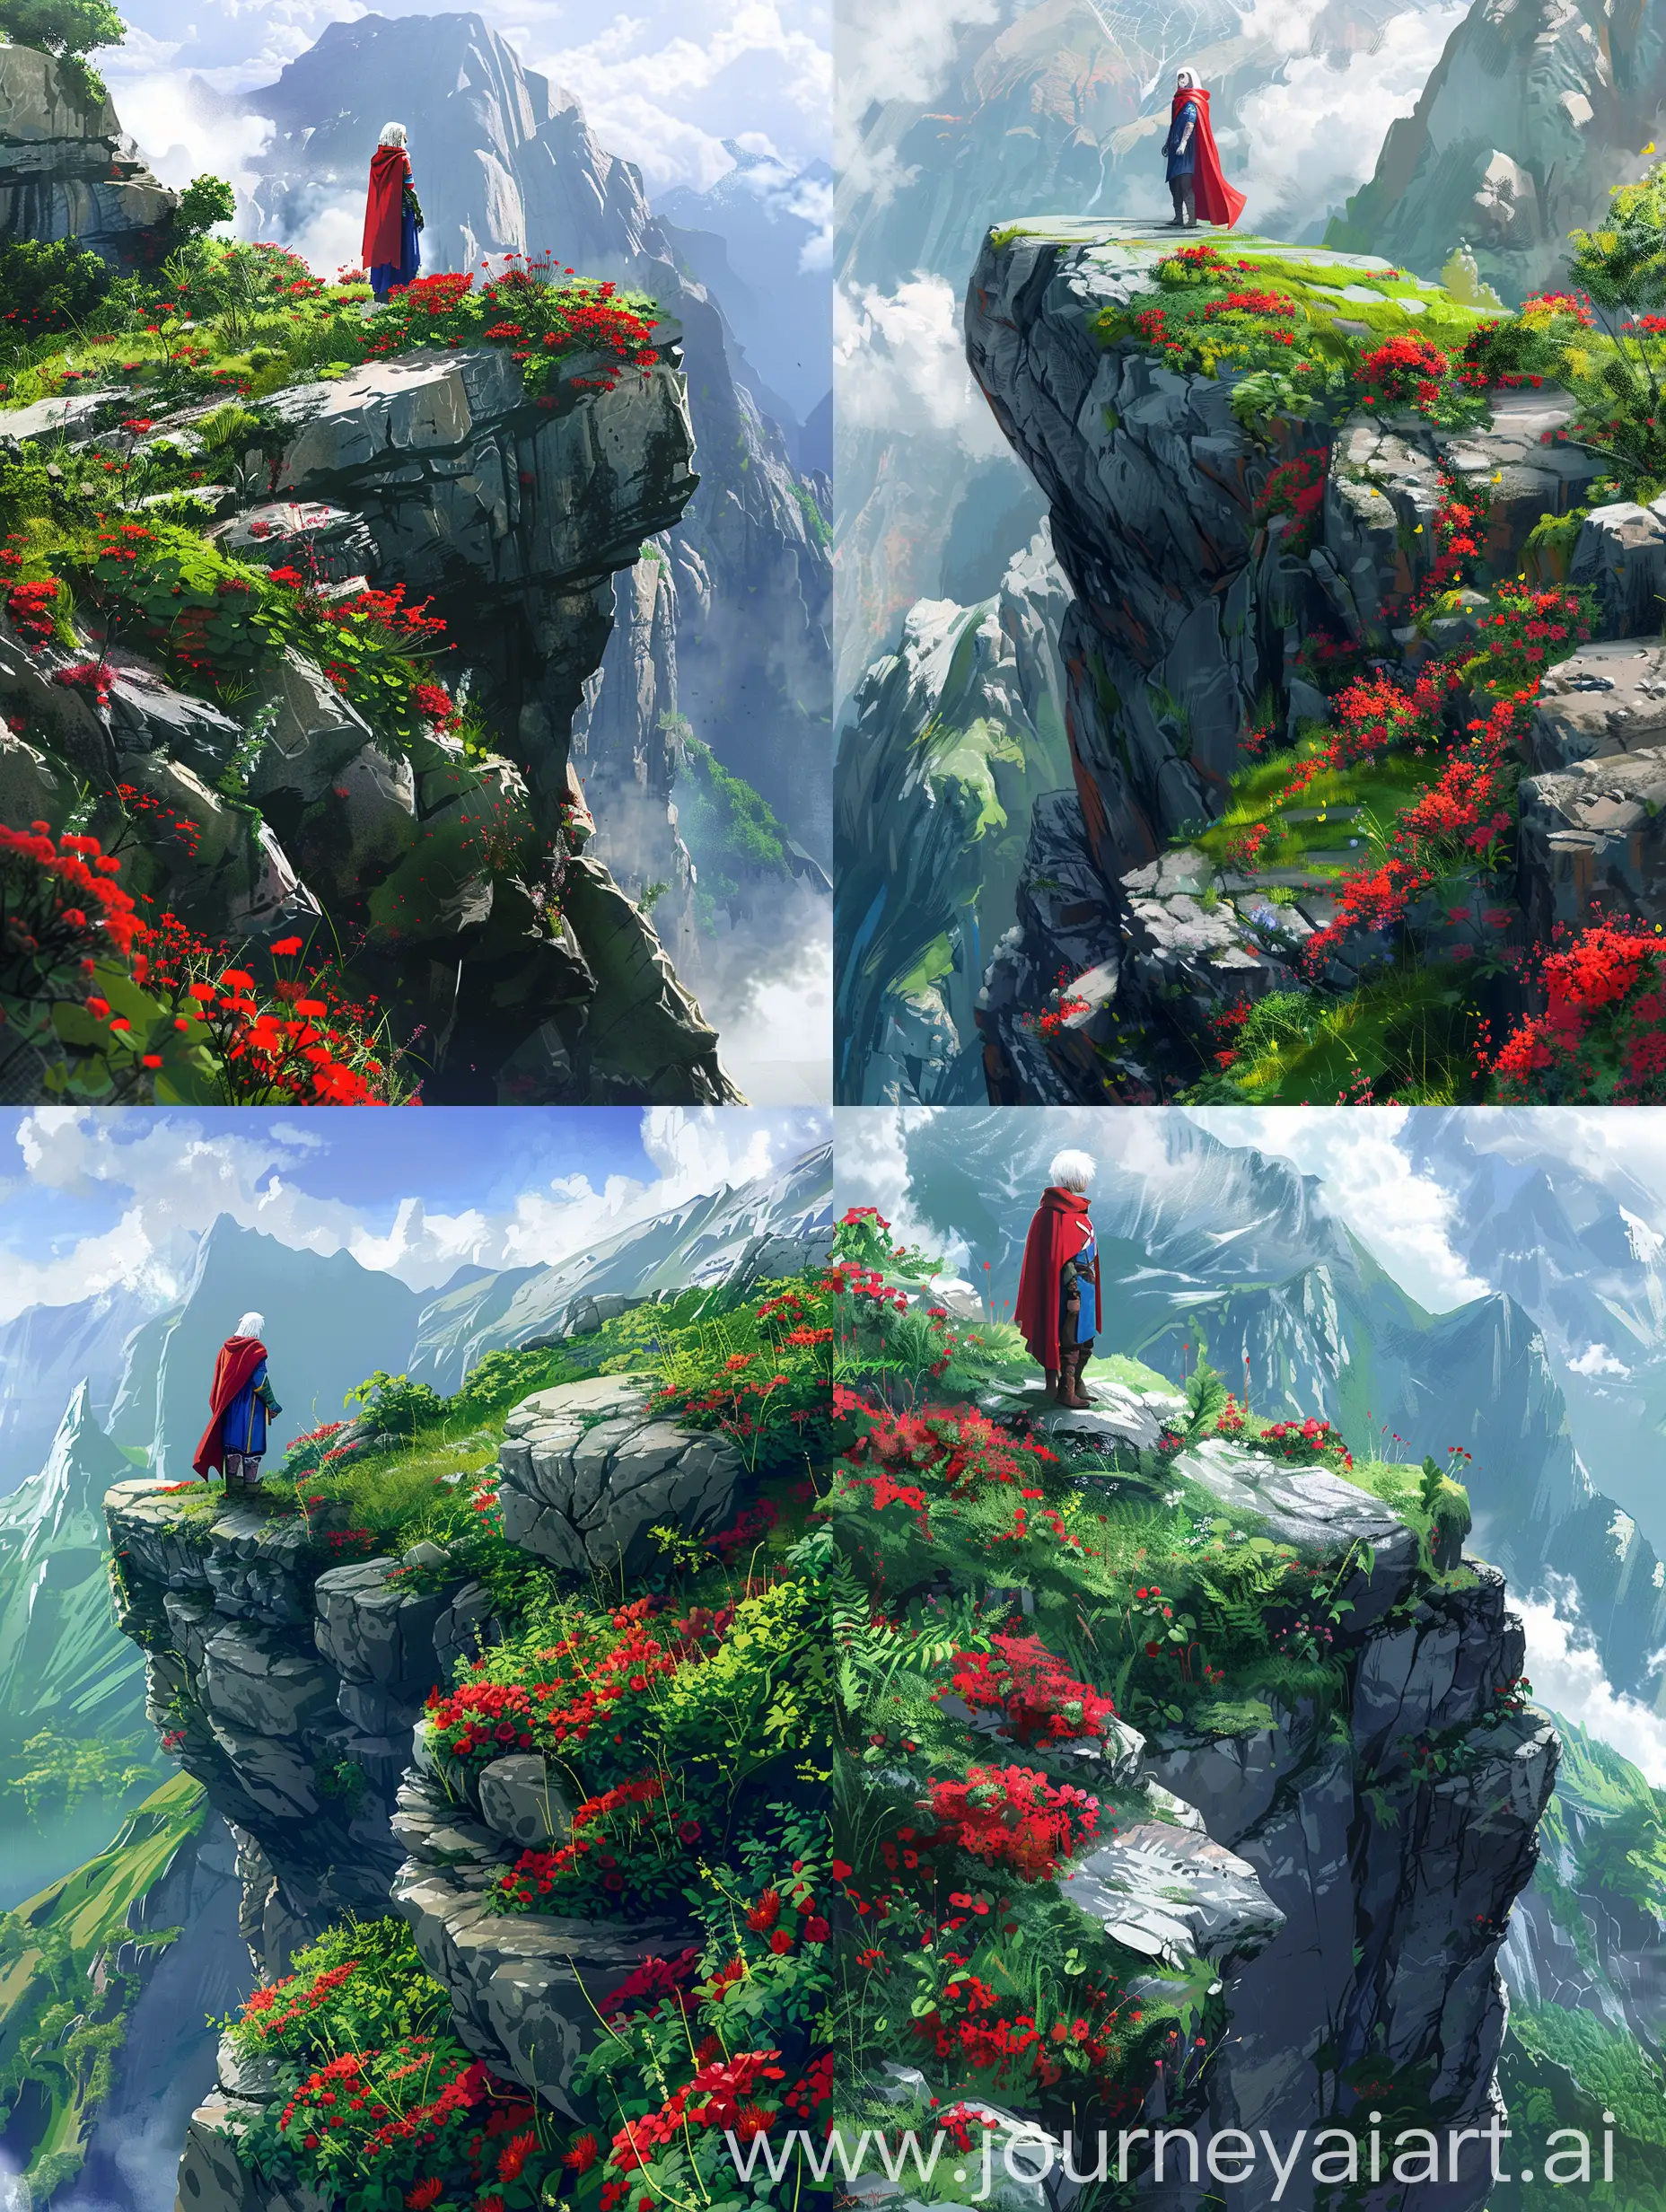 Digital painting of medieval warrior stands on the edge of a rocky mountain, surrounded by lush greenery and vibrant red flowers. The warrior wears a red cloak and blue attire, their white hair contrasting against the natural backdrop. . The rocky cliff extends into the distance, adorned with green grass and bright red blooms. Beyond the cliff, majestic mountains rise, their peaks disappearing into fluffy white clouds. The overall atmosphere is serene and awe-inspiring.